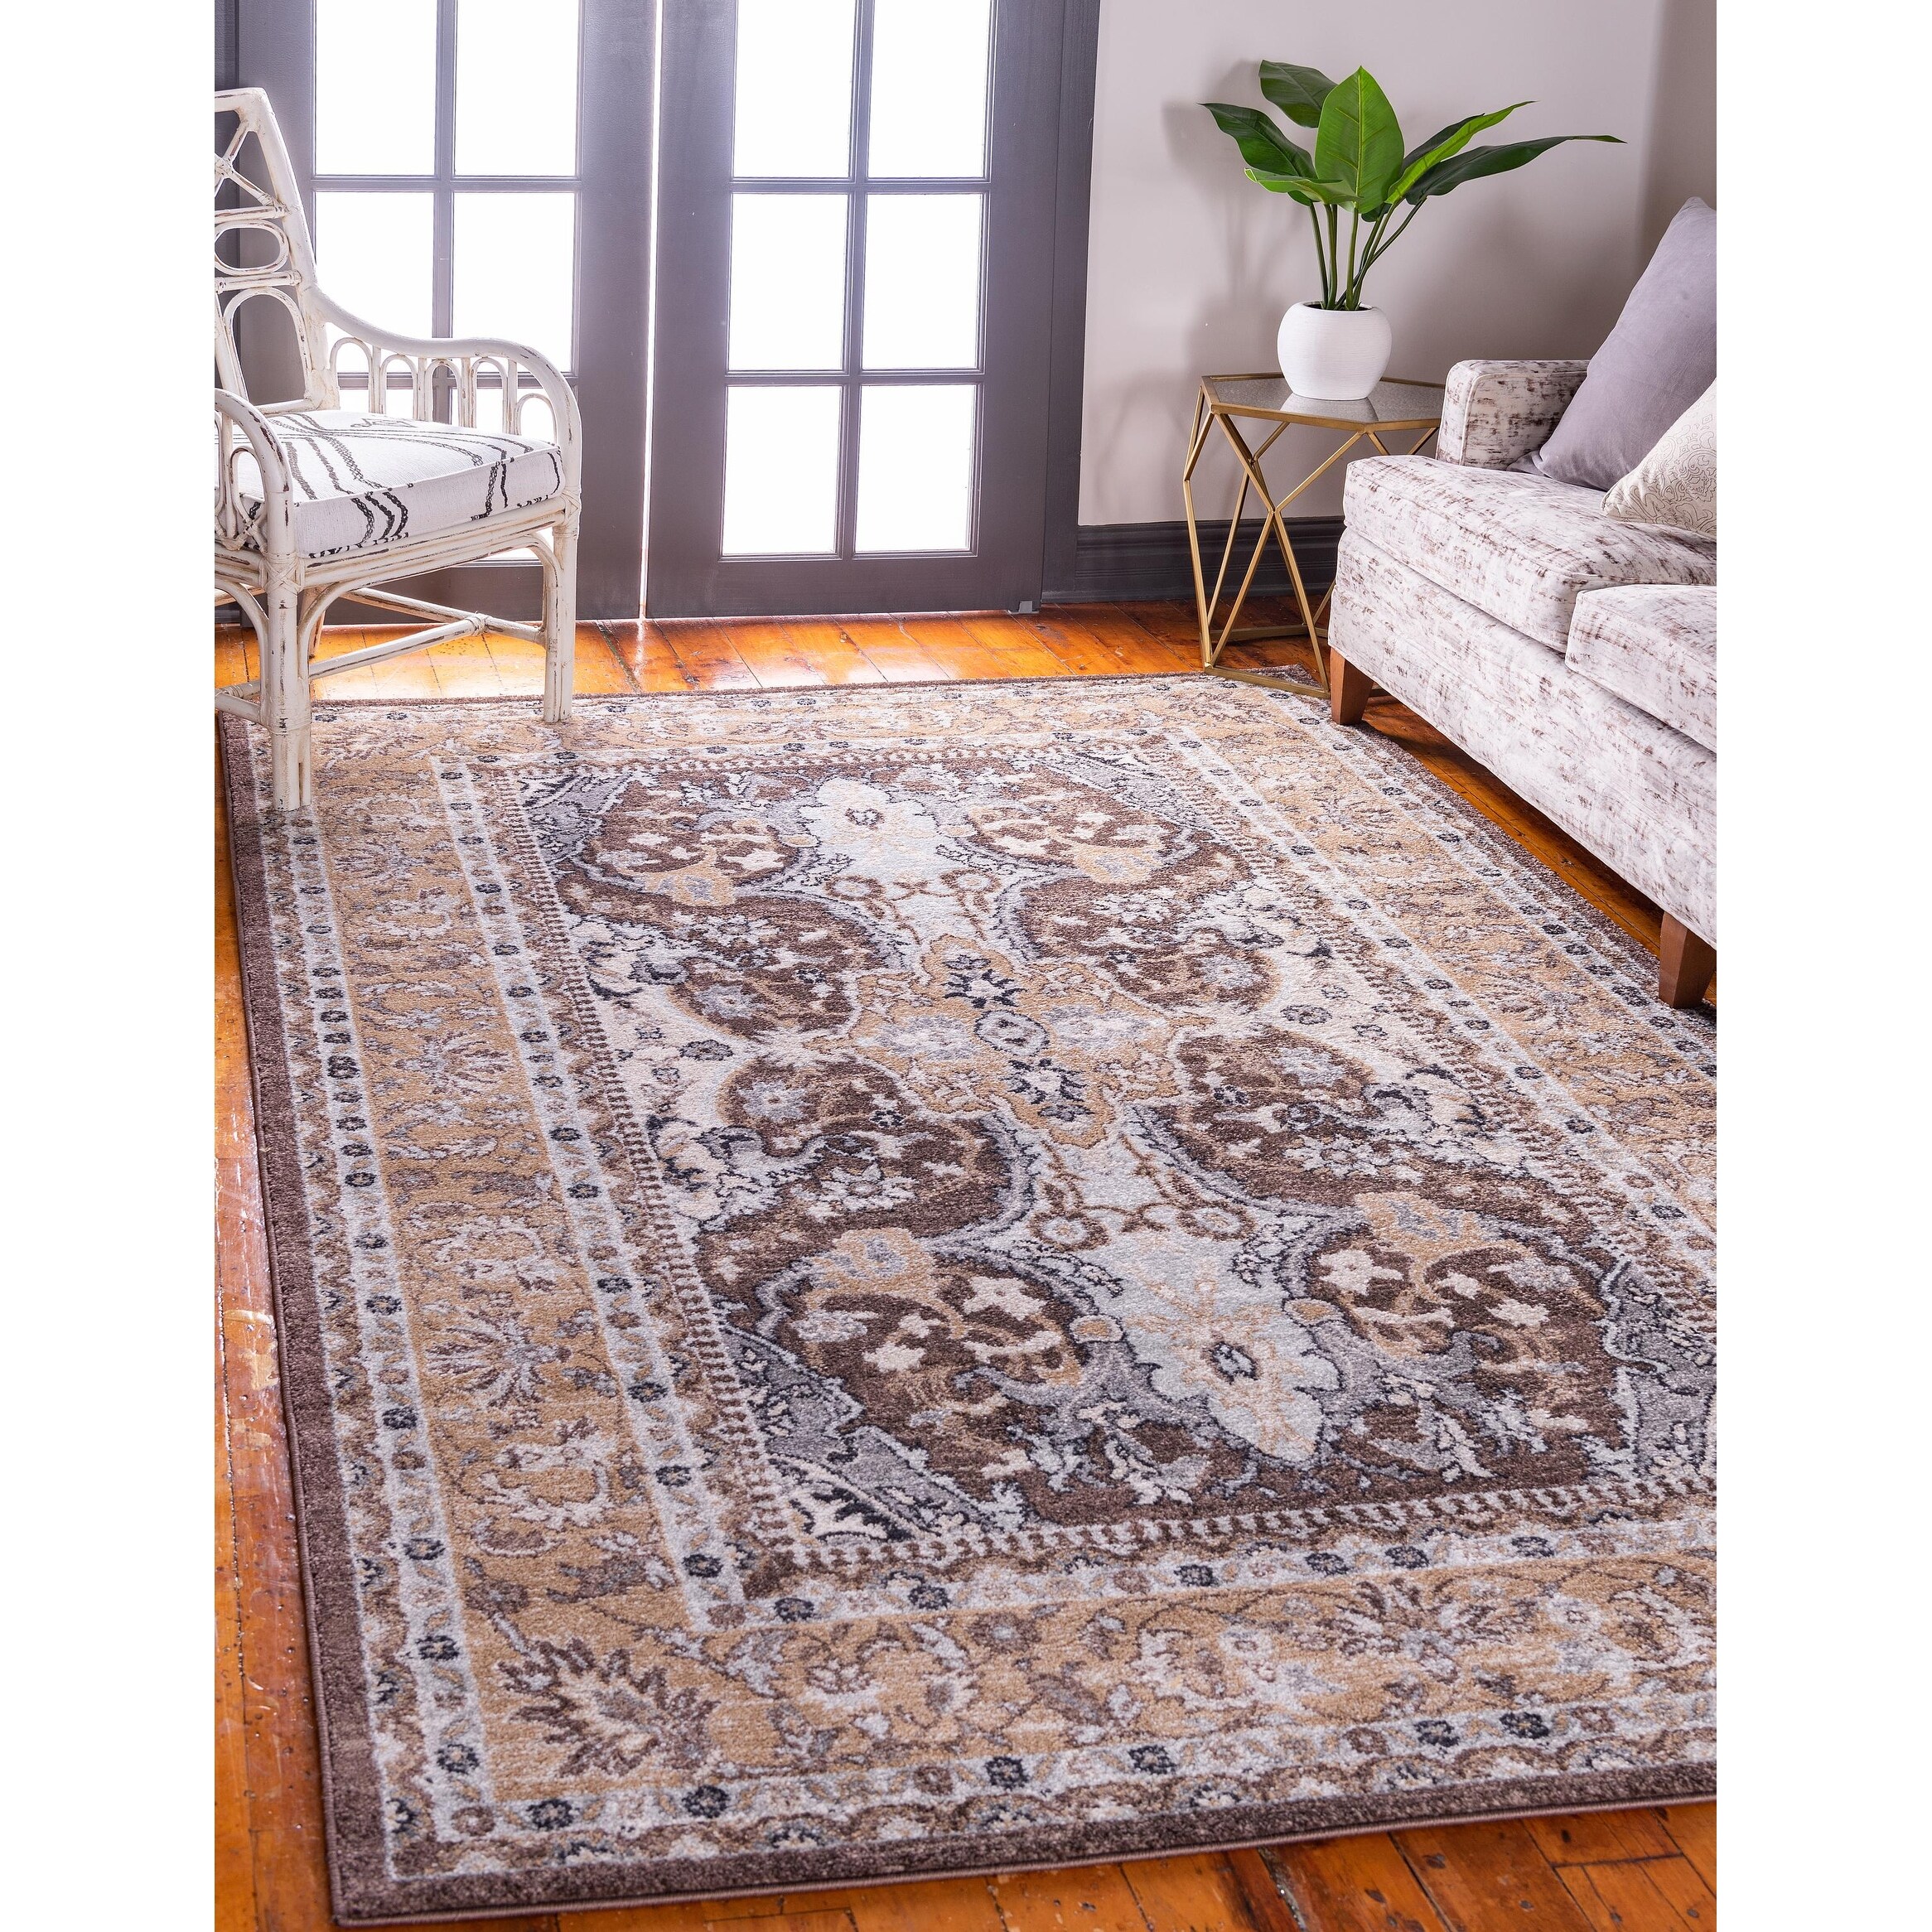 Unique Loom 3136234 Traditional Over-Dyed Vintage Area Rug Turquoise/Ivory 8 x 10 ft 